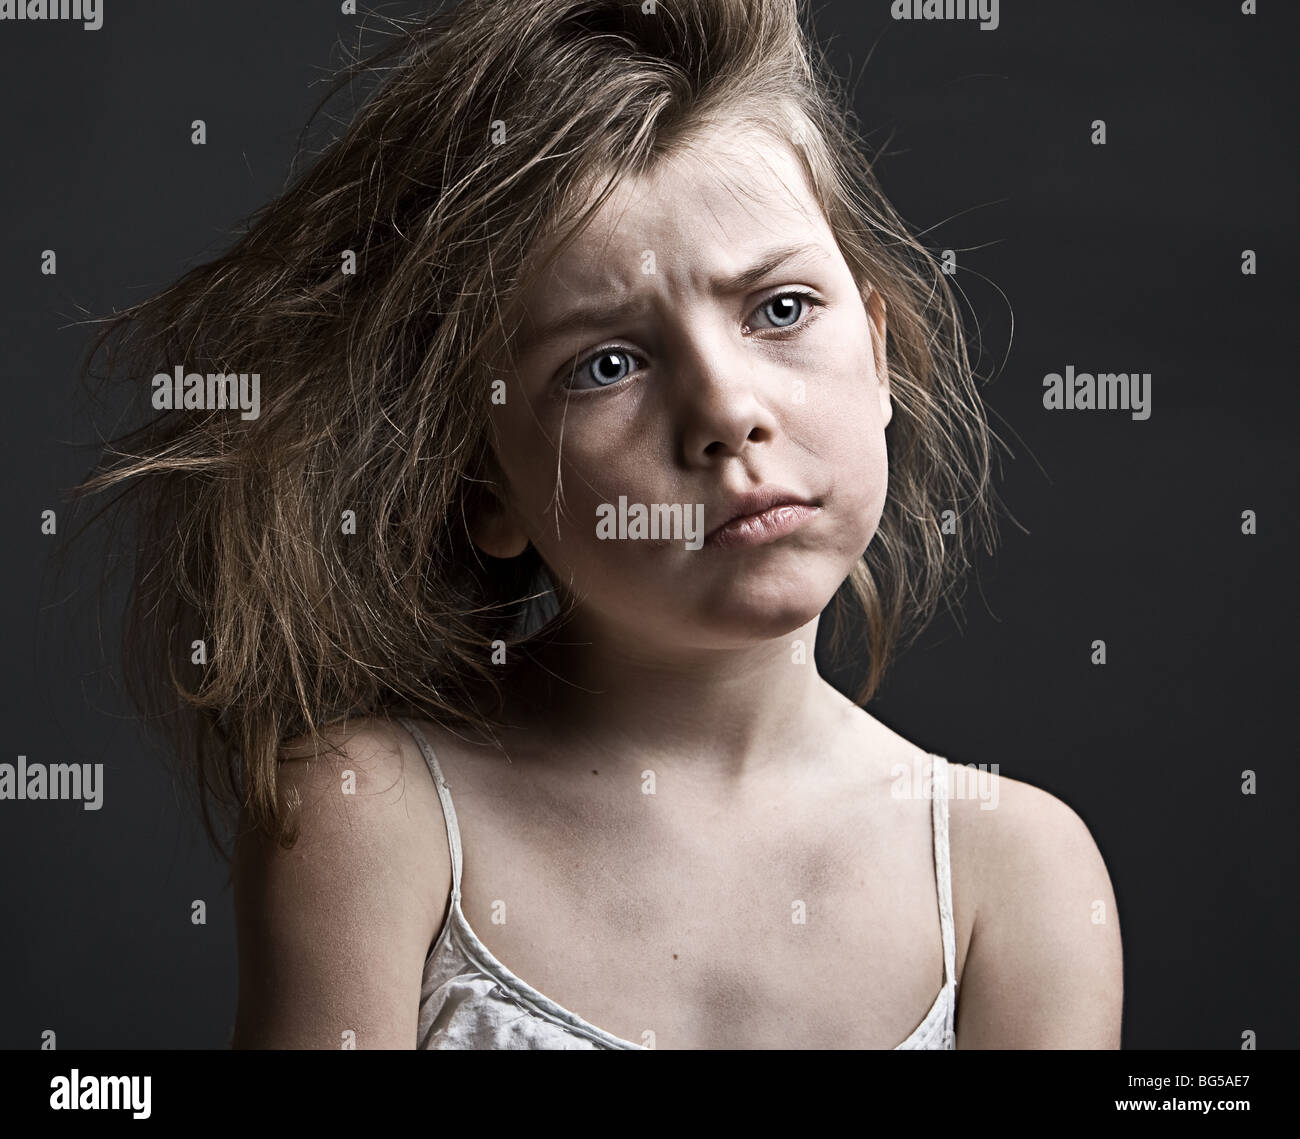 Powerful Shot of a Messy Child against a Grey Background Stock Photo